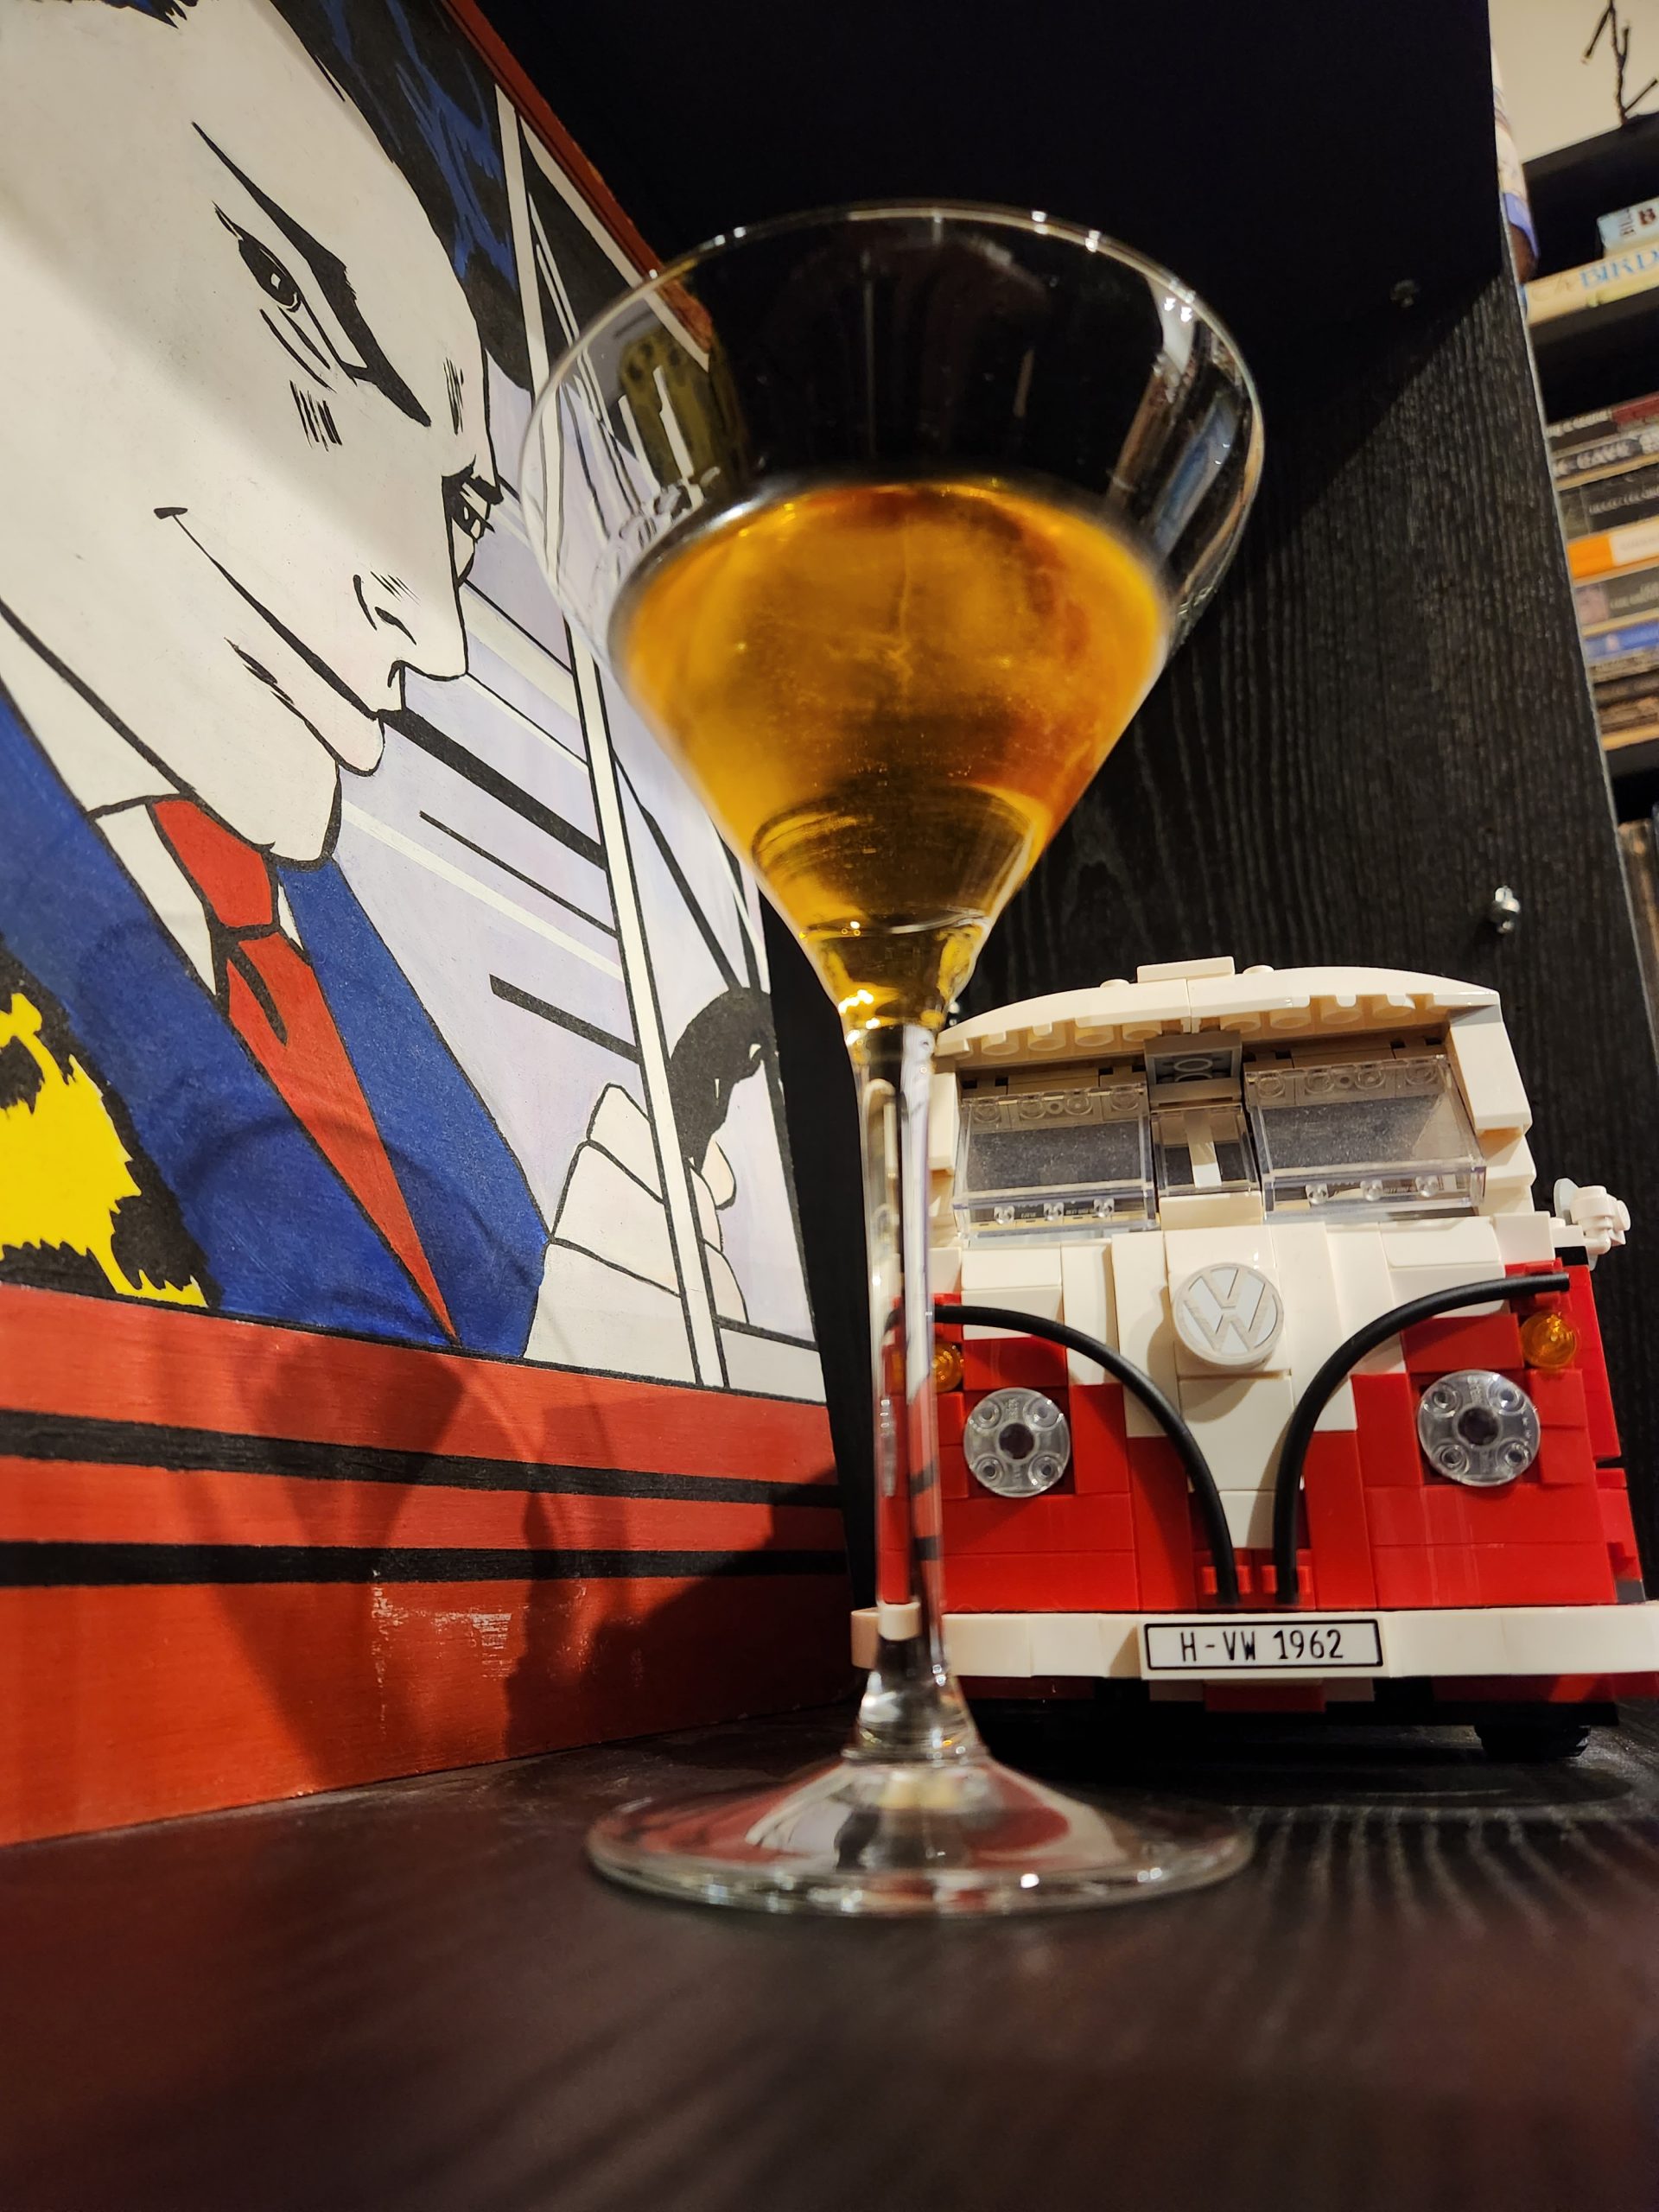 A Guadalajara Cocktail in a Martini glass on a bookcase with a Lego VW van behind it.